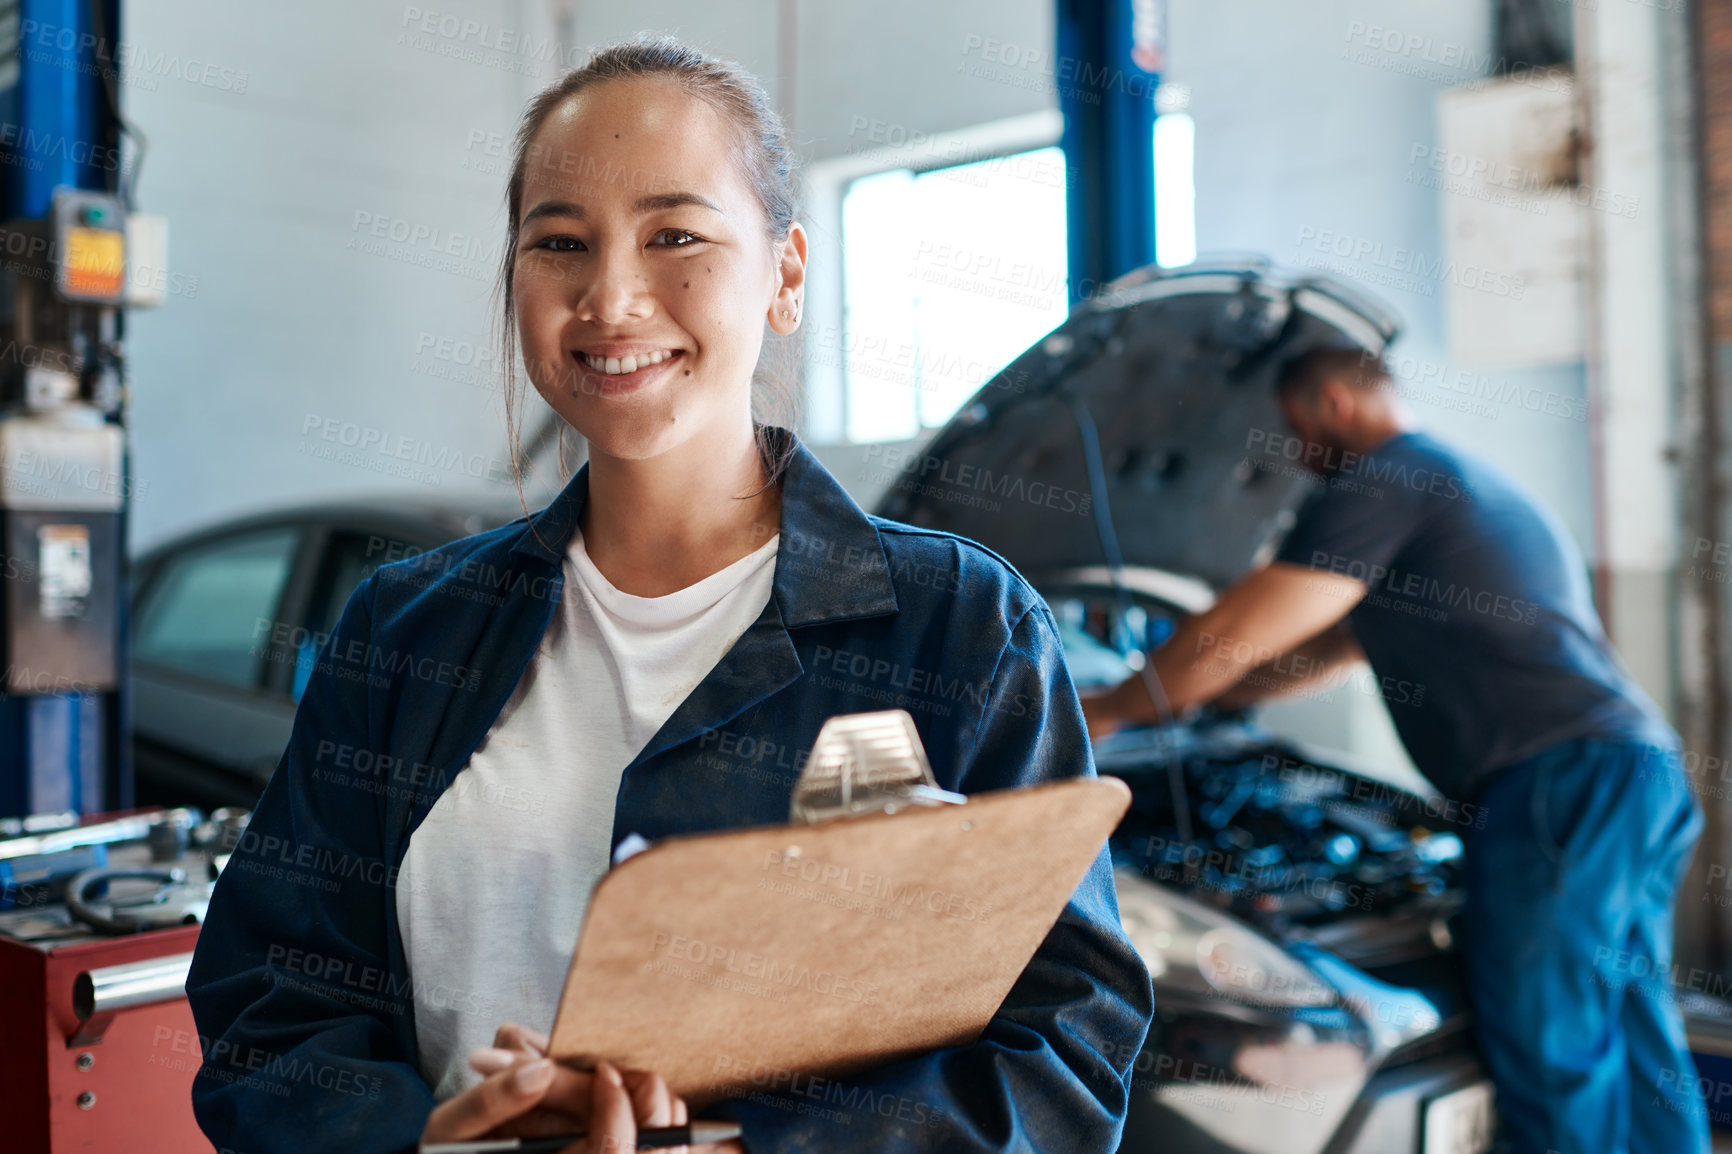 Buy stock photo Shot of a female mechanic holding a clipboard while working in an auto repair shop